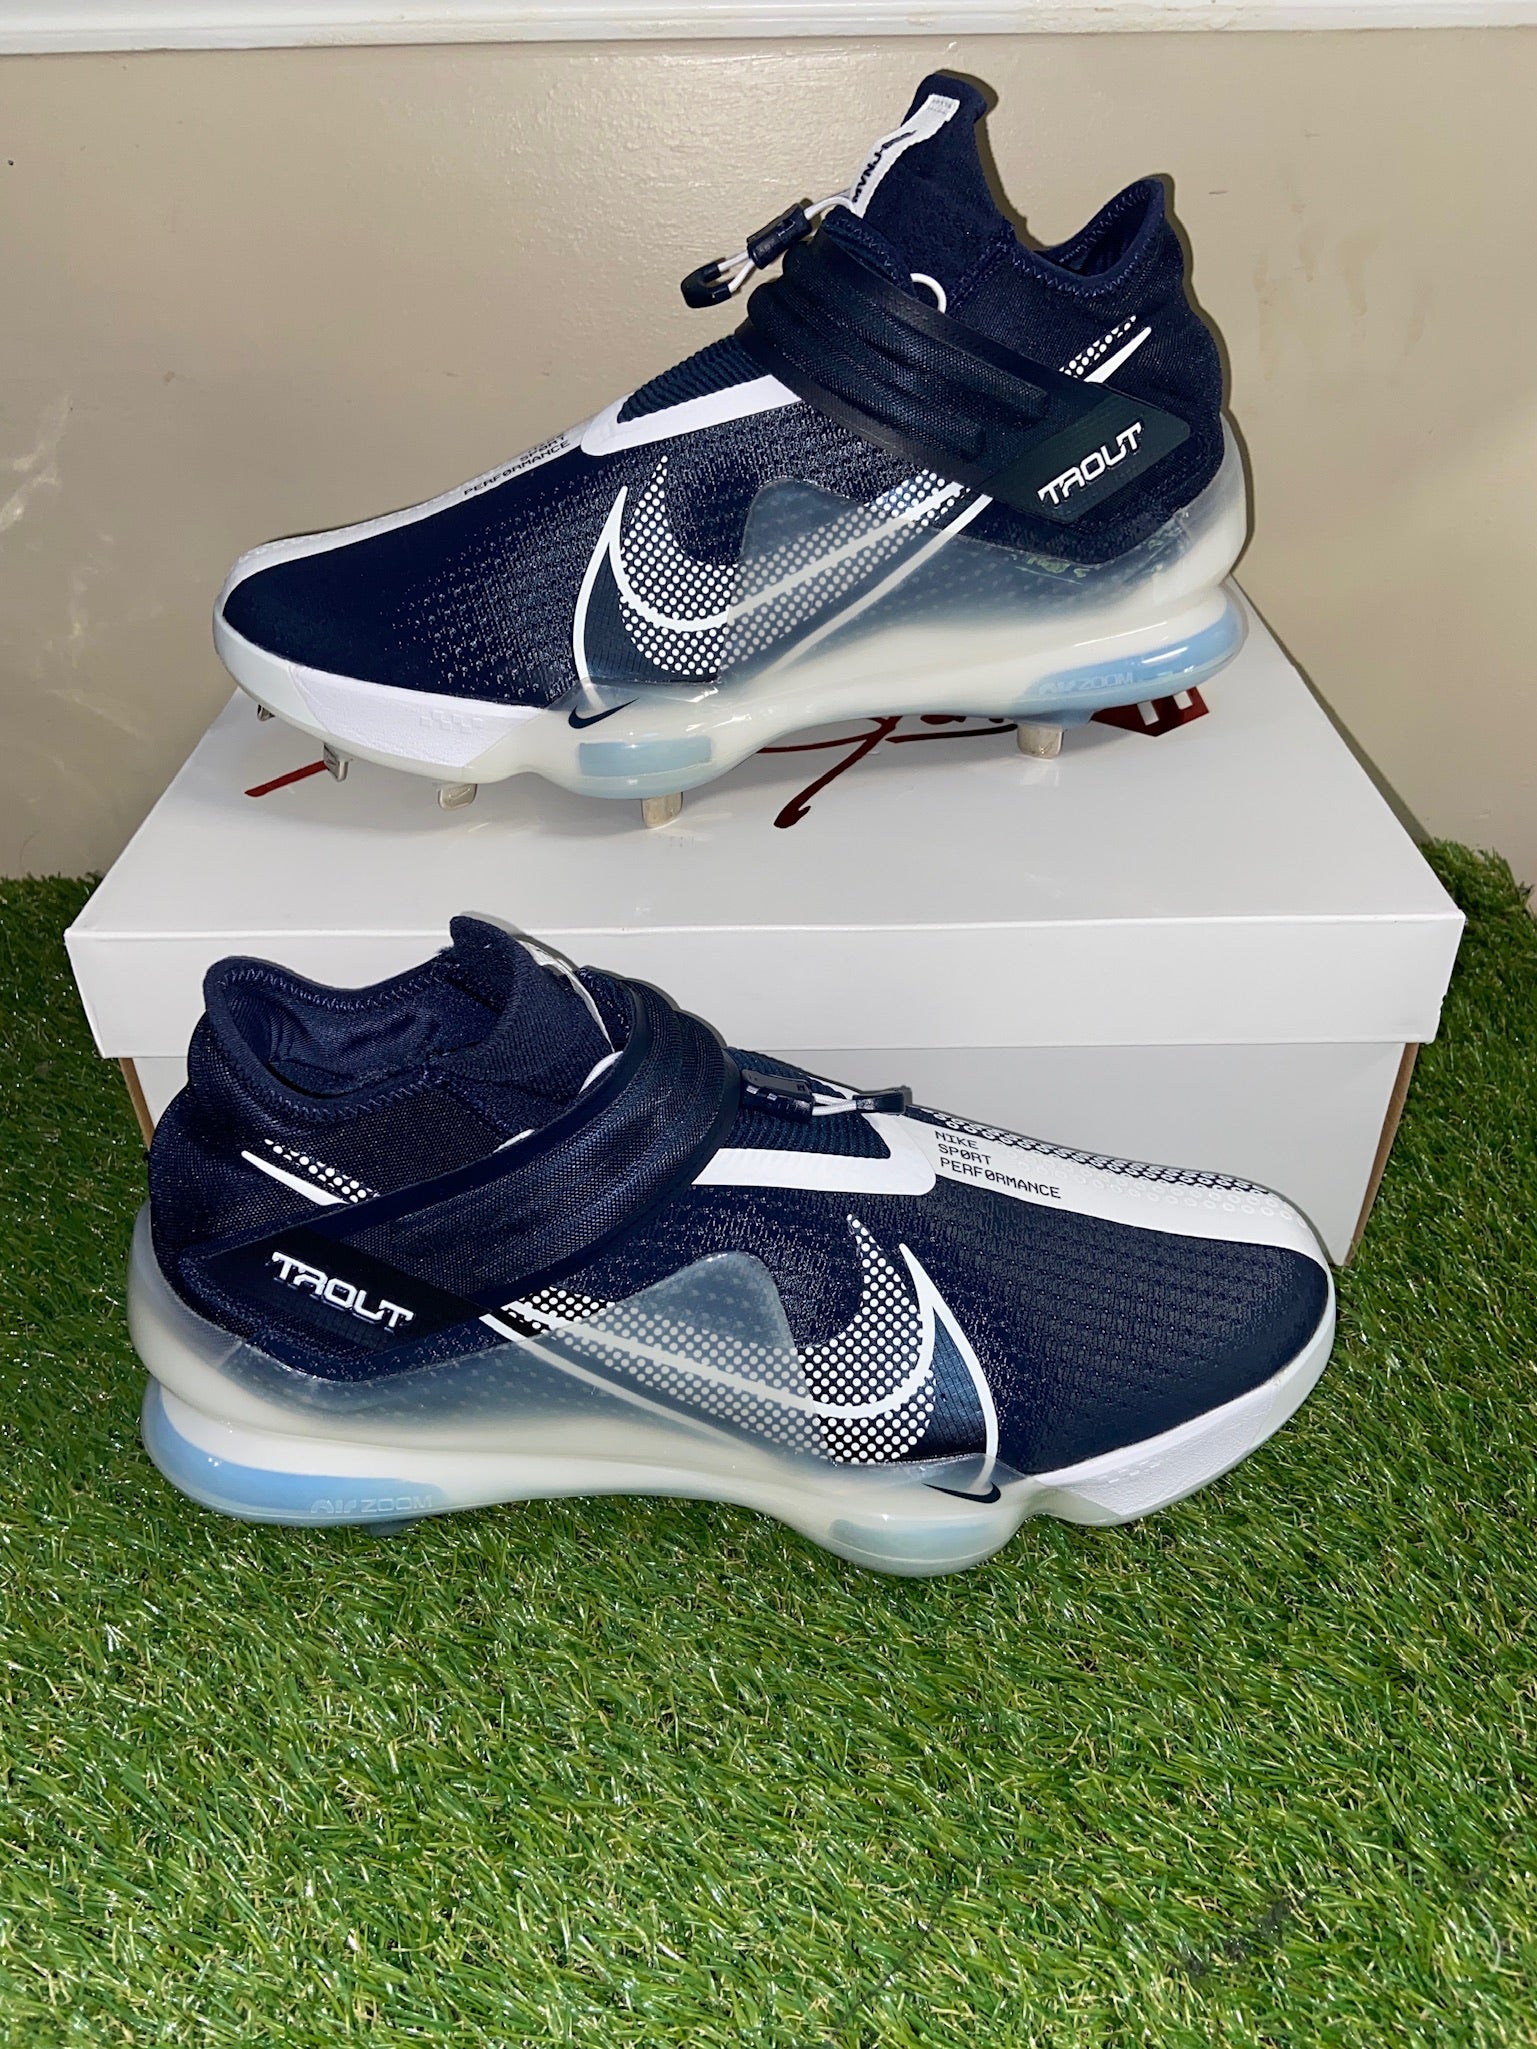 Nike Men's Force Zoom Trout 7 Metal Baseball Cleats, Size 13, College Navy/White